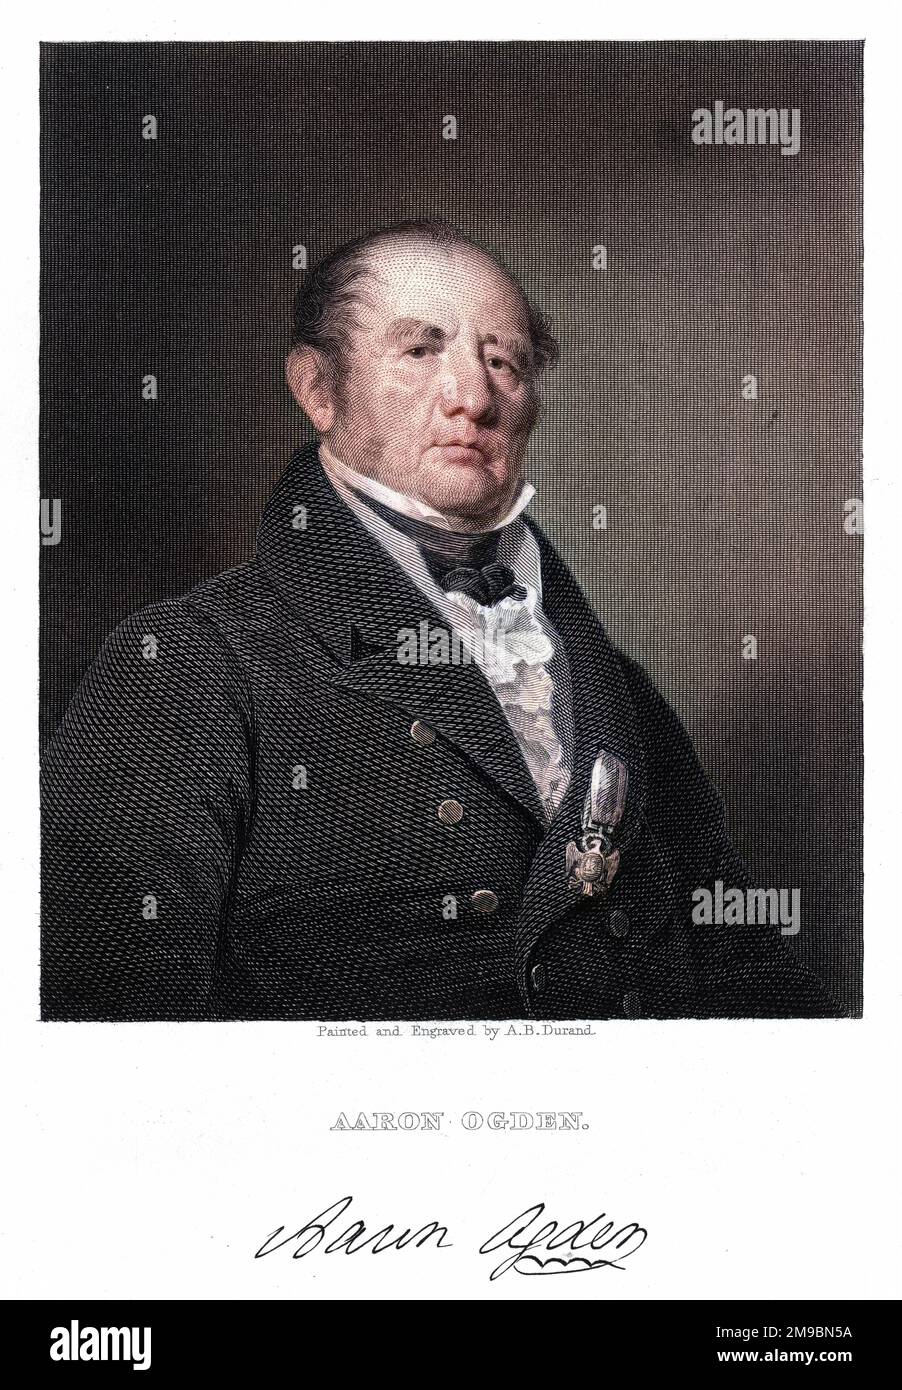 AARON OGDEN American lawyer and shipowner, involved in the famous Gibbons-Ogden dispute ; governor of New Jersey. Stock Photo